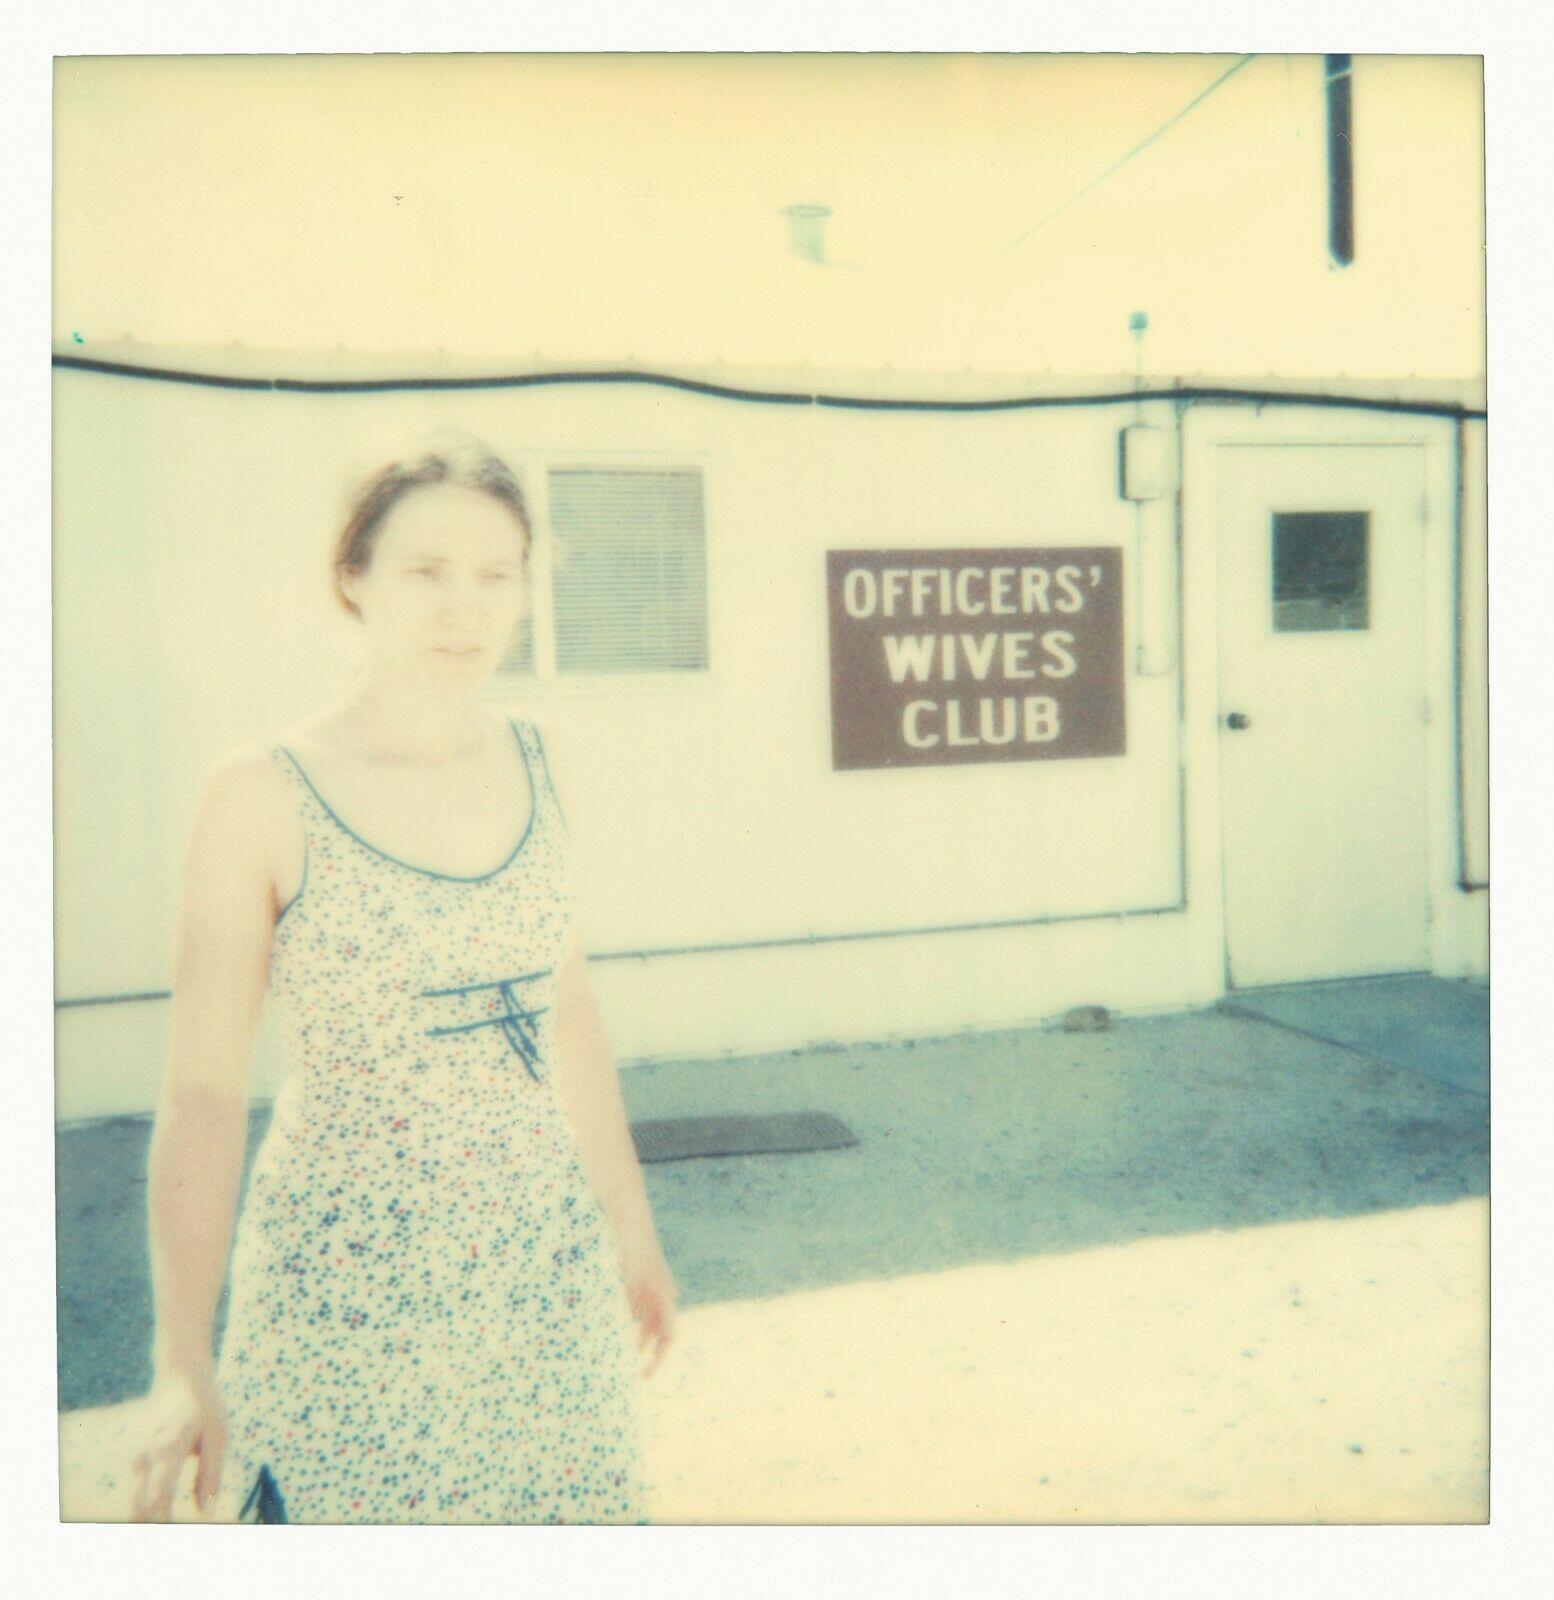 Officer's Wives Club - Contemporary, 21st Century, Polaroid, Figurative - Photograph by Stefanie Schneider